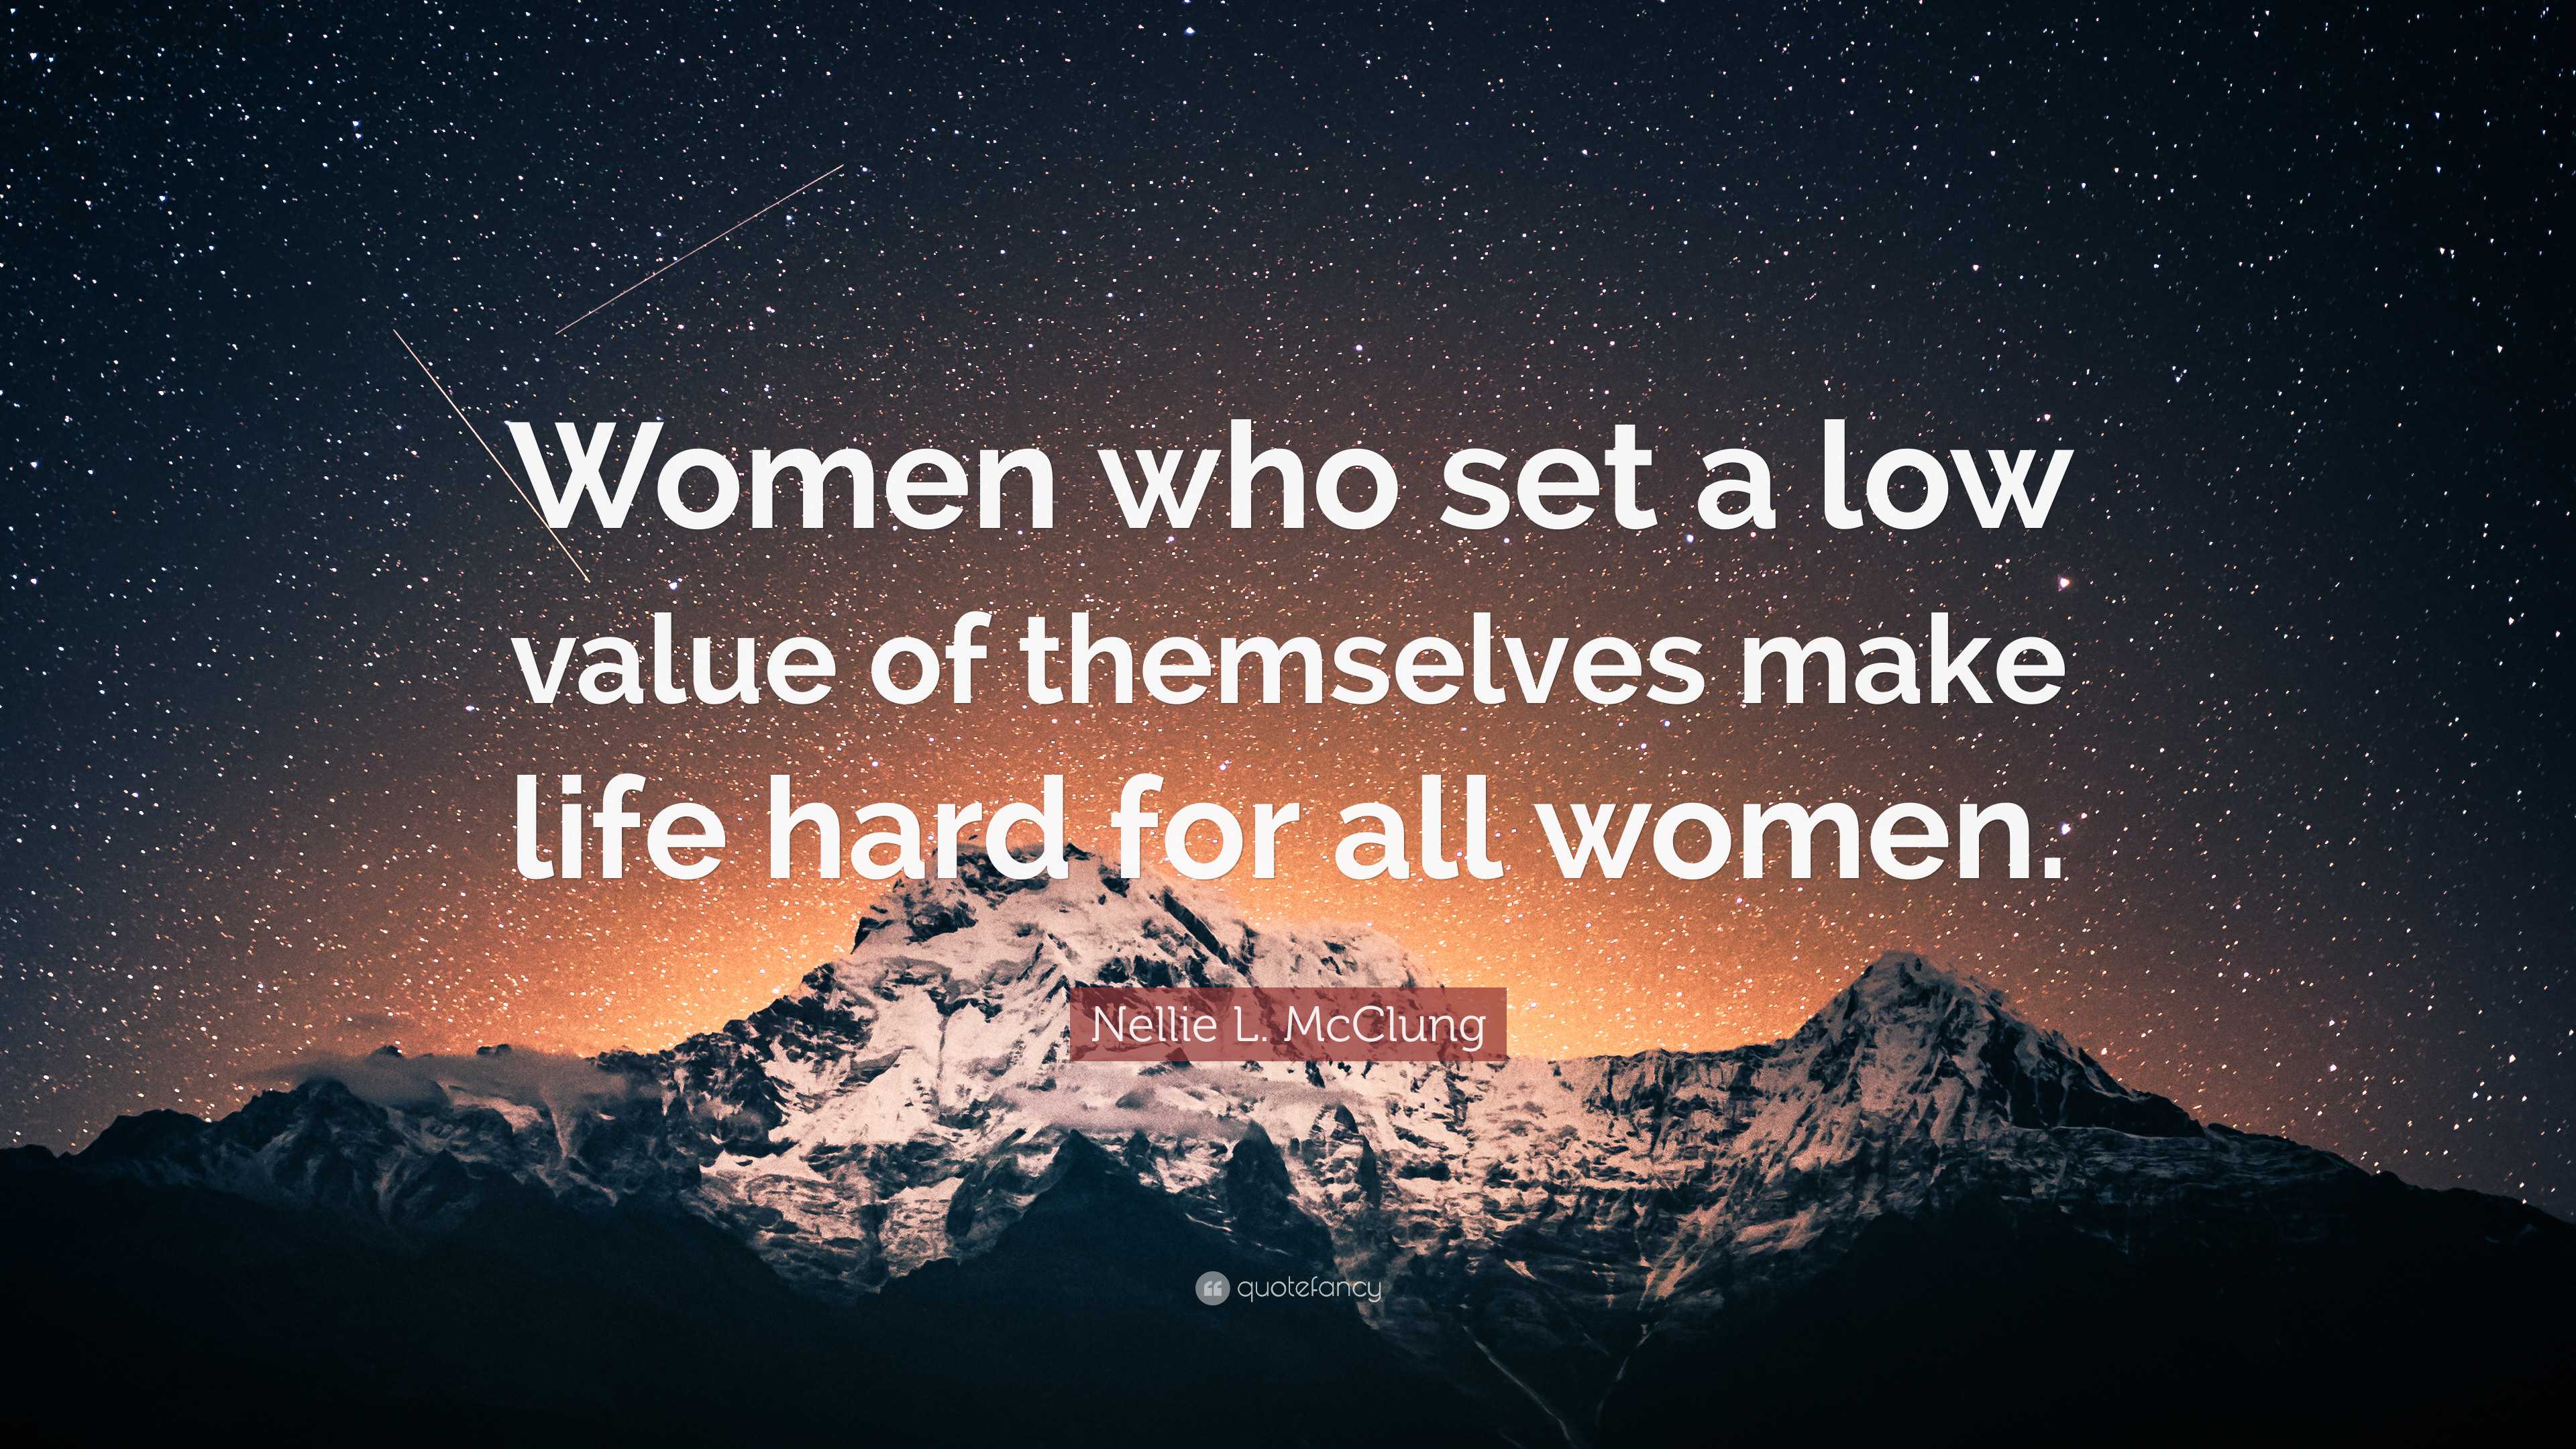 Nellie L. McClung Quote: “Women who set a low value of themselves make life  hard for